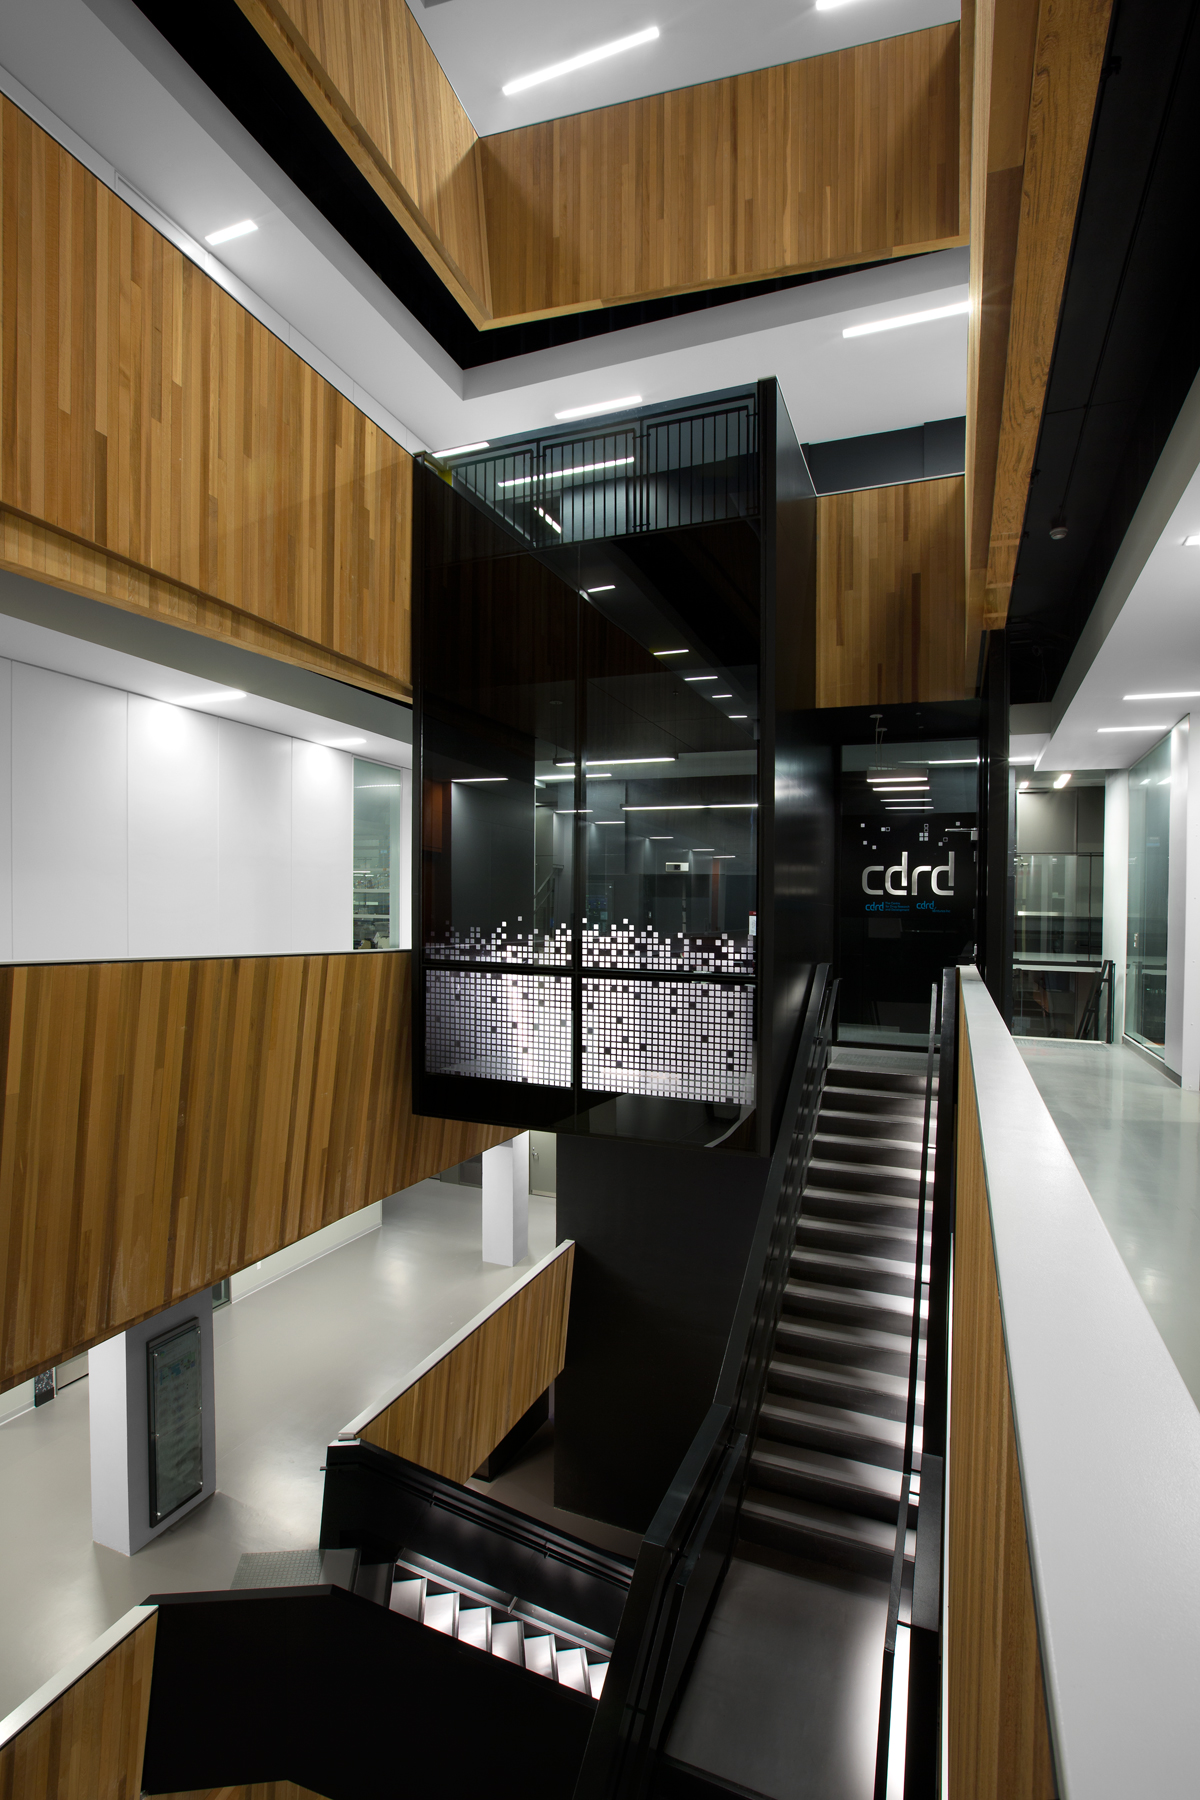 Multi storey stairwell interior image showing prominent use of exposed wood throughout the building, including wall cladding in the atriums, exposed wall guard protection and trim